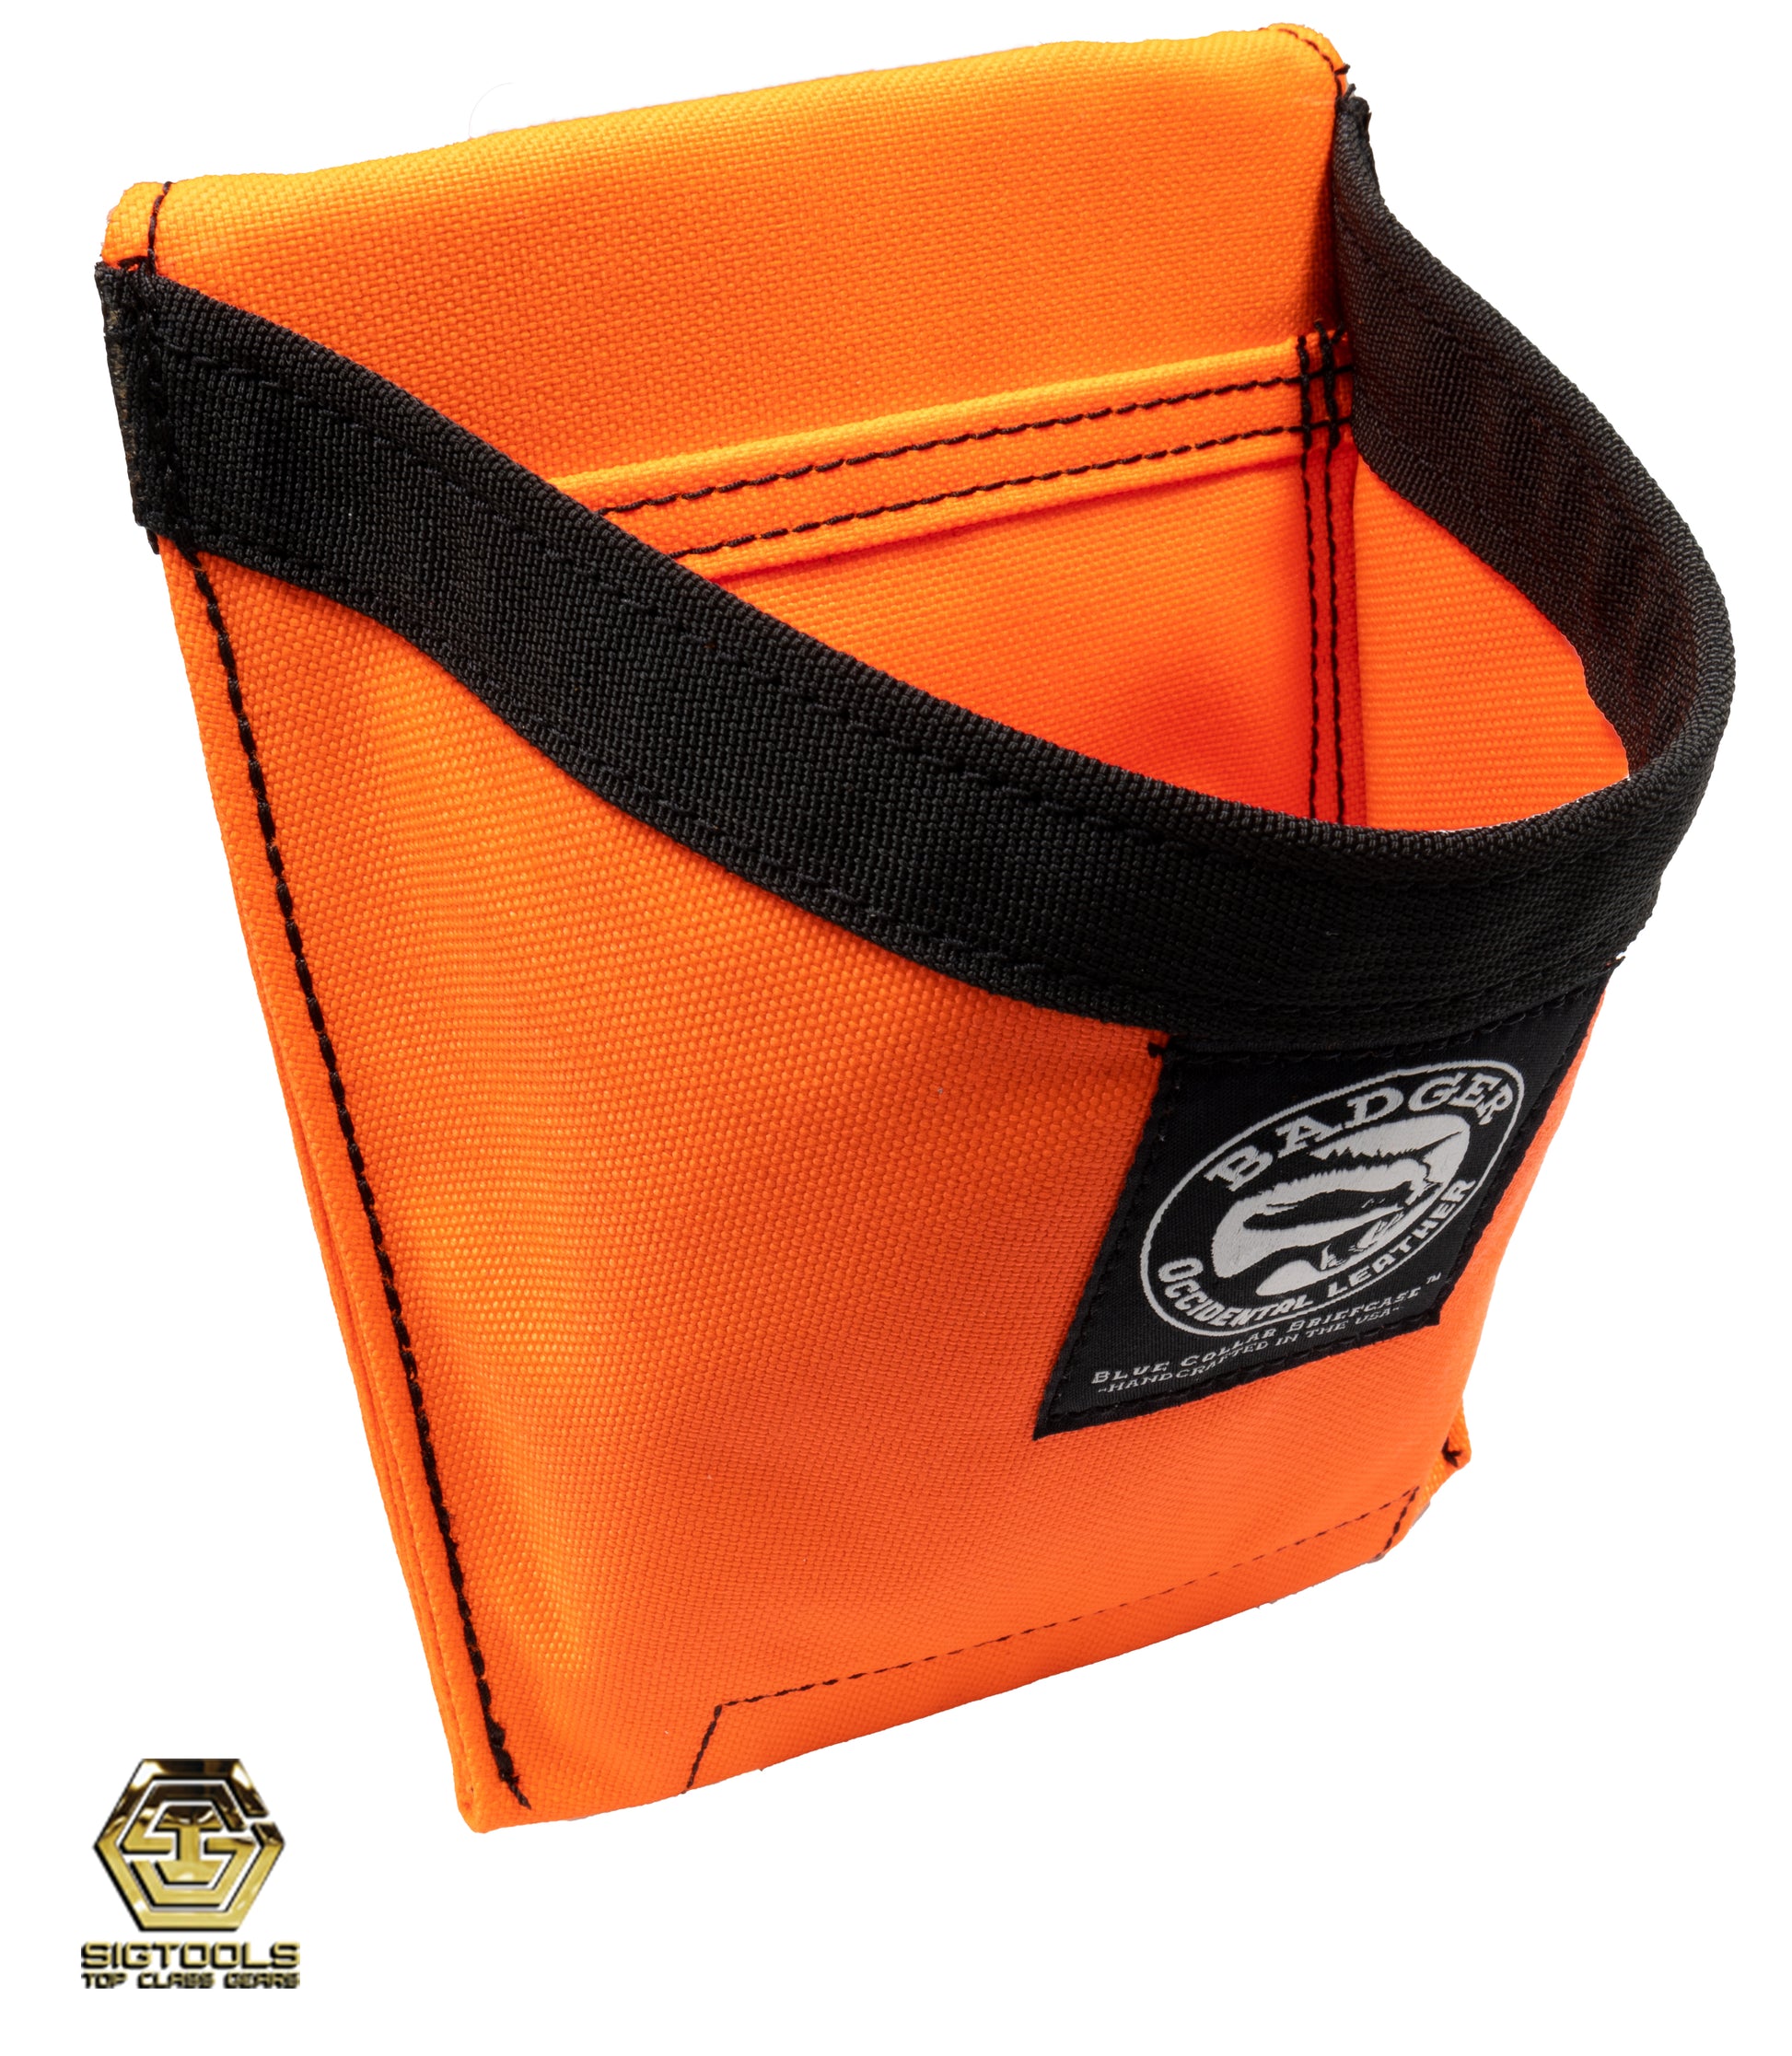 A Side view of the high-visibility Tool Pouch from Badger, a practical accessory designed for carrying and organizing tools.